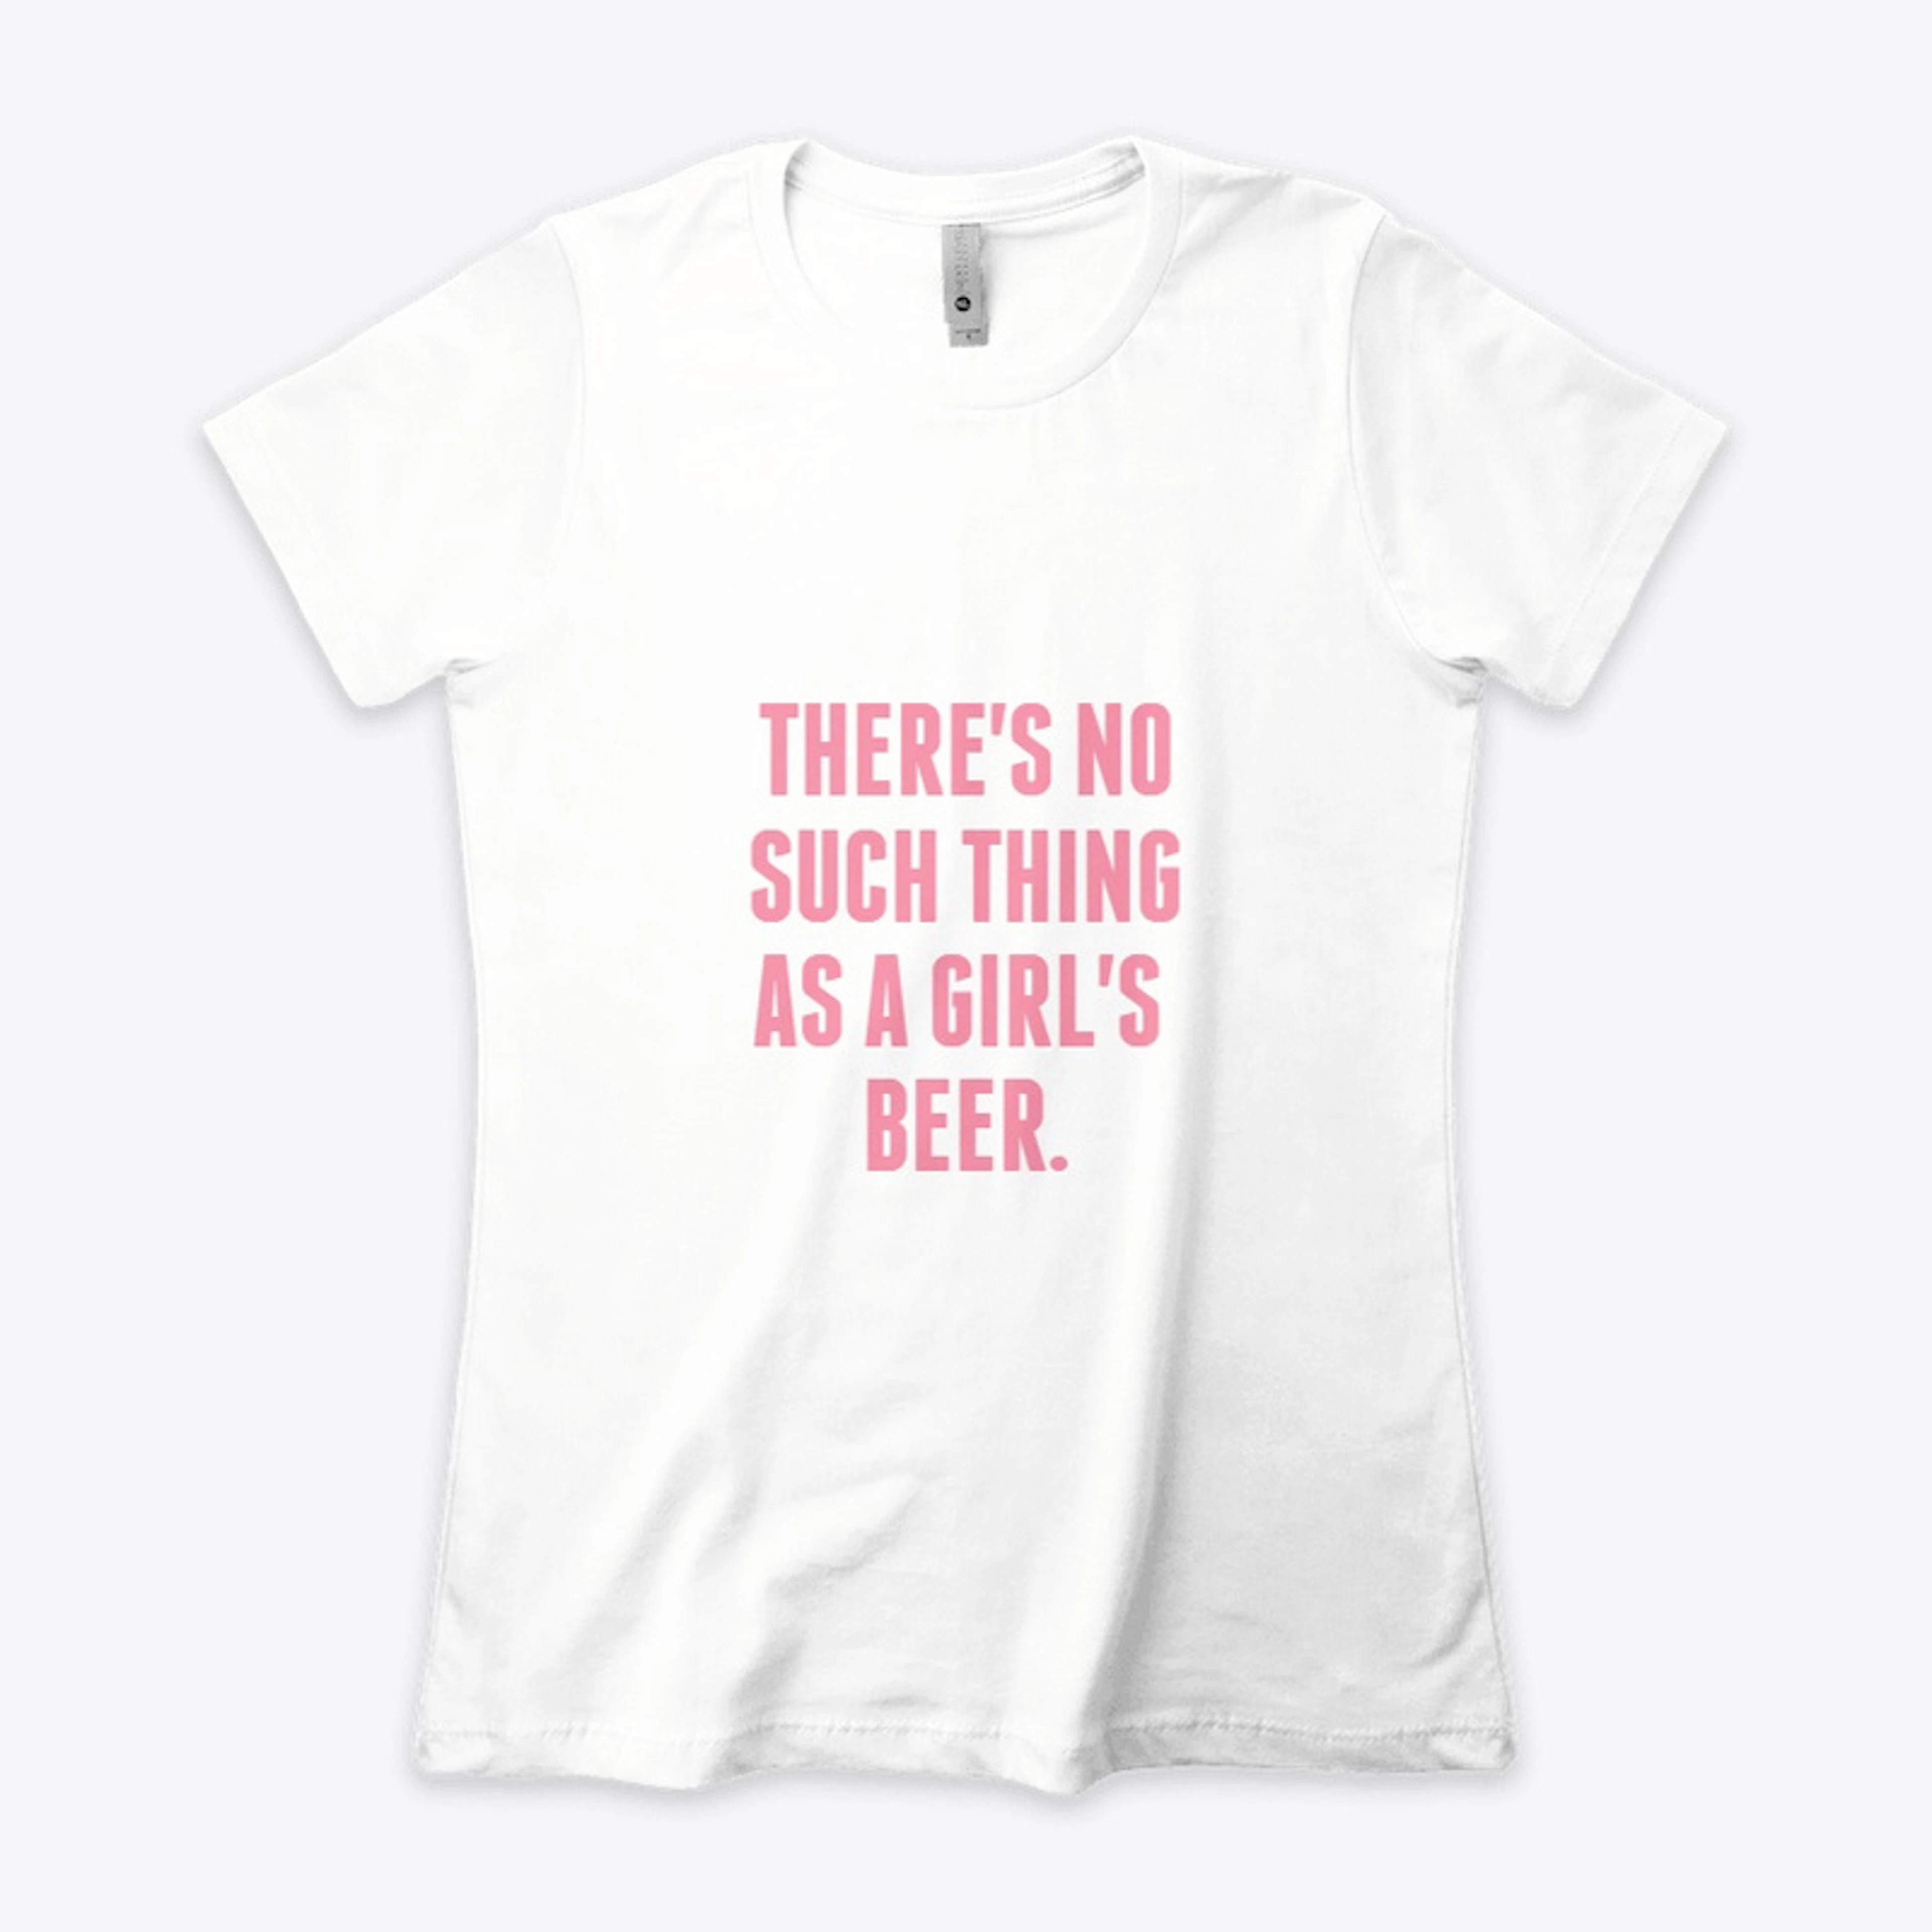 NO SUCH THING AS A GIRL'S BEER #1